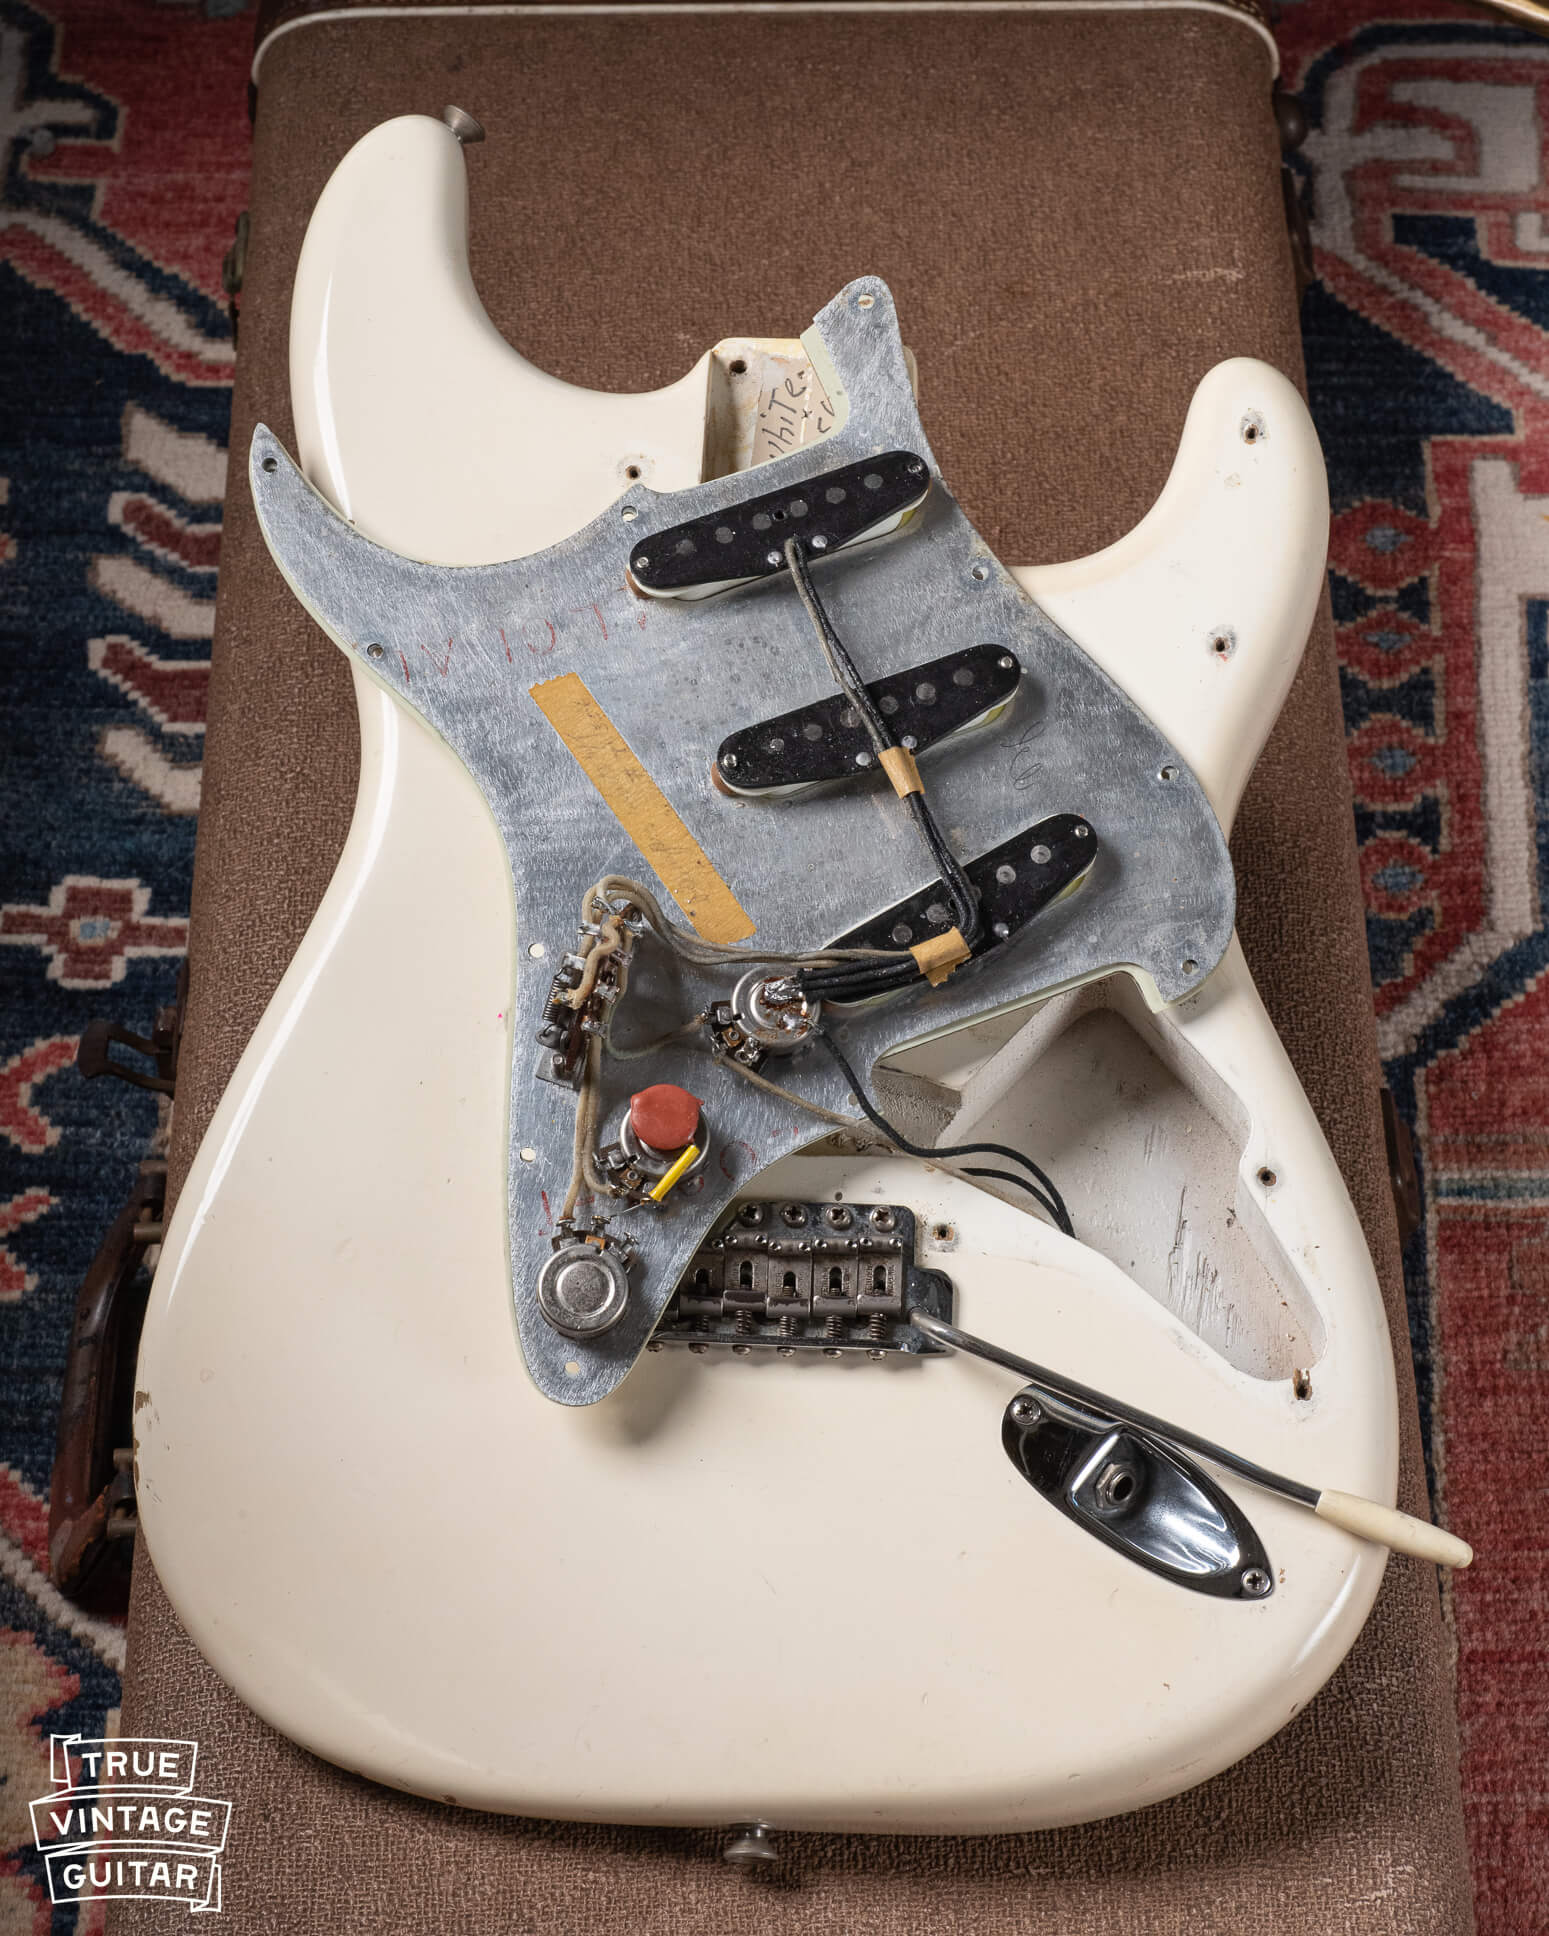 1961 Stratocaster pickguard with pickups, potentiometers, switch, and masking tape